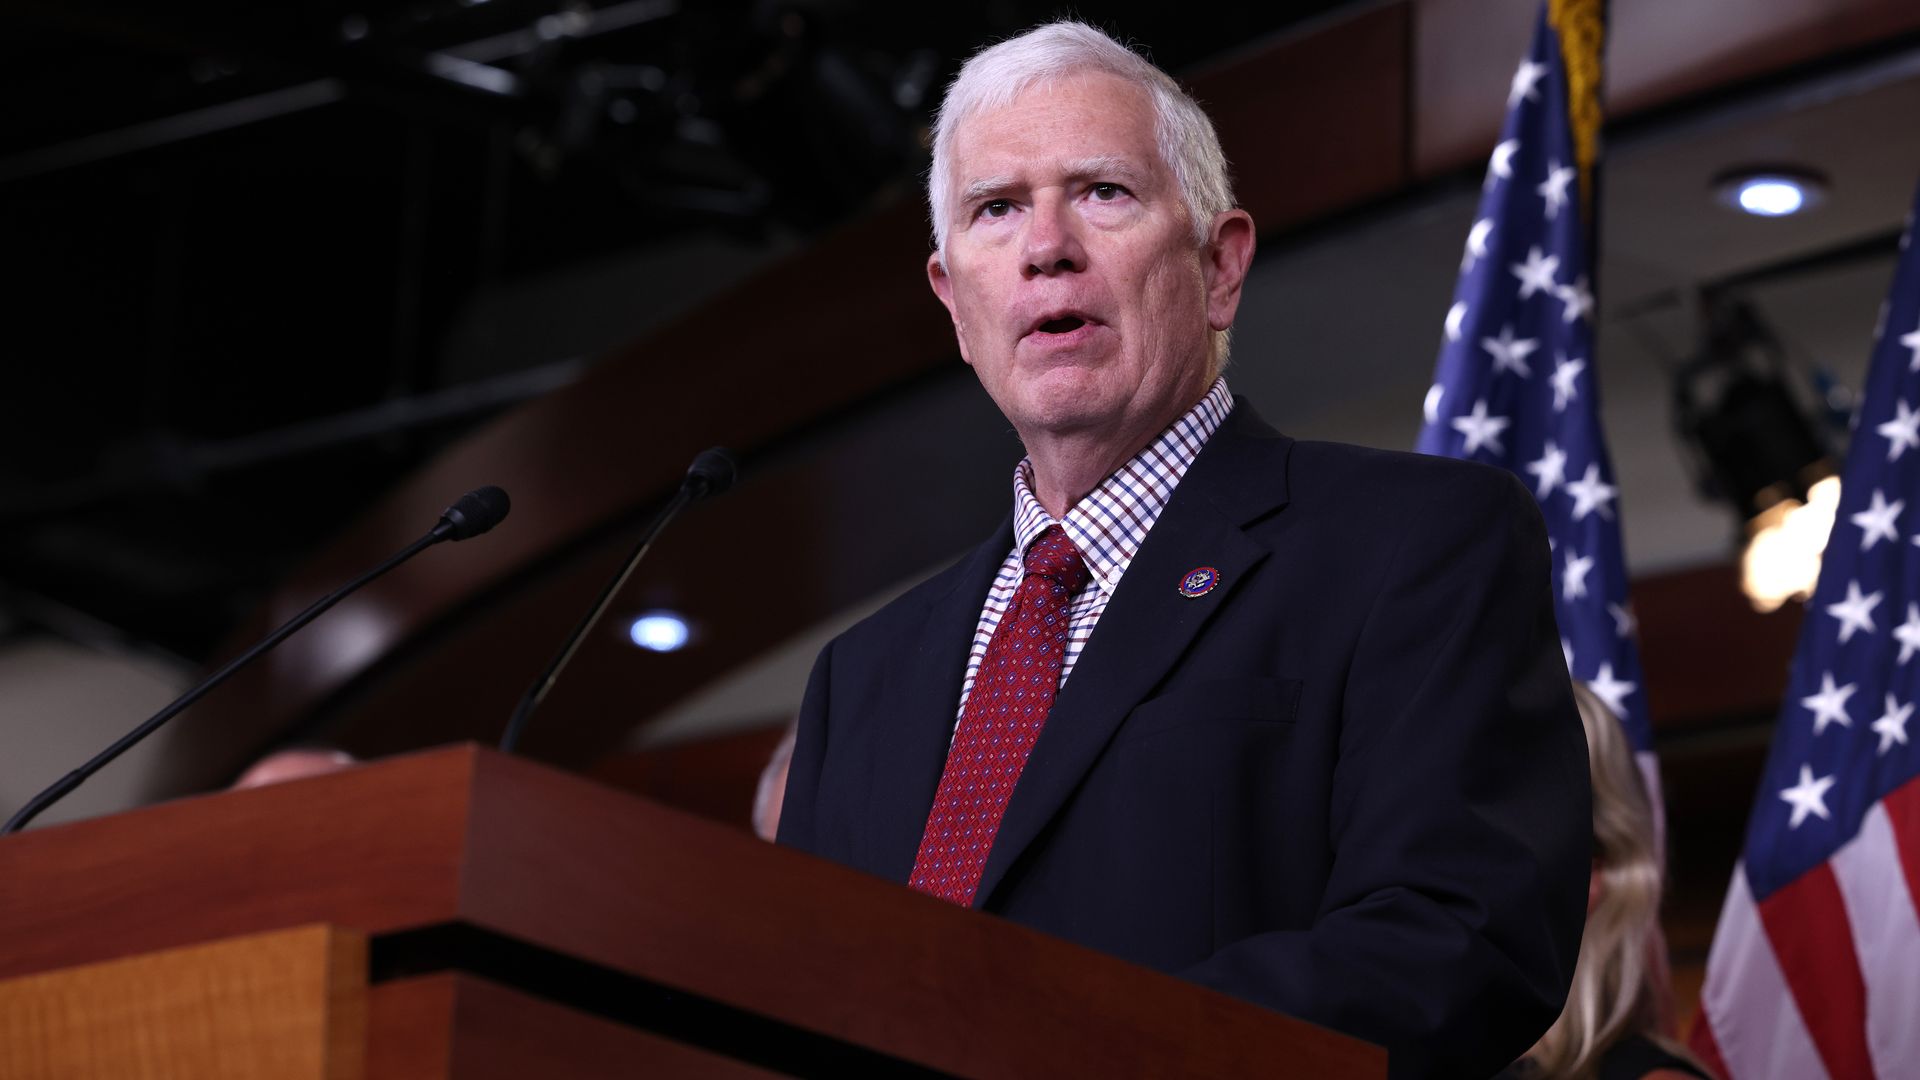 Rep. Mo Brooks speaks at a news conference on the “Fire Fauci Act” on Capitol Hill on June 15, 2021 in Washington, DC.